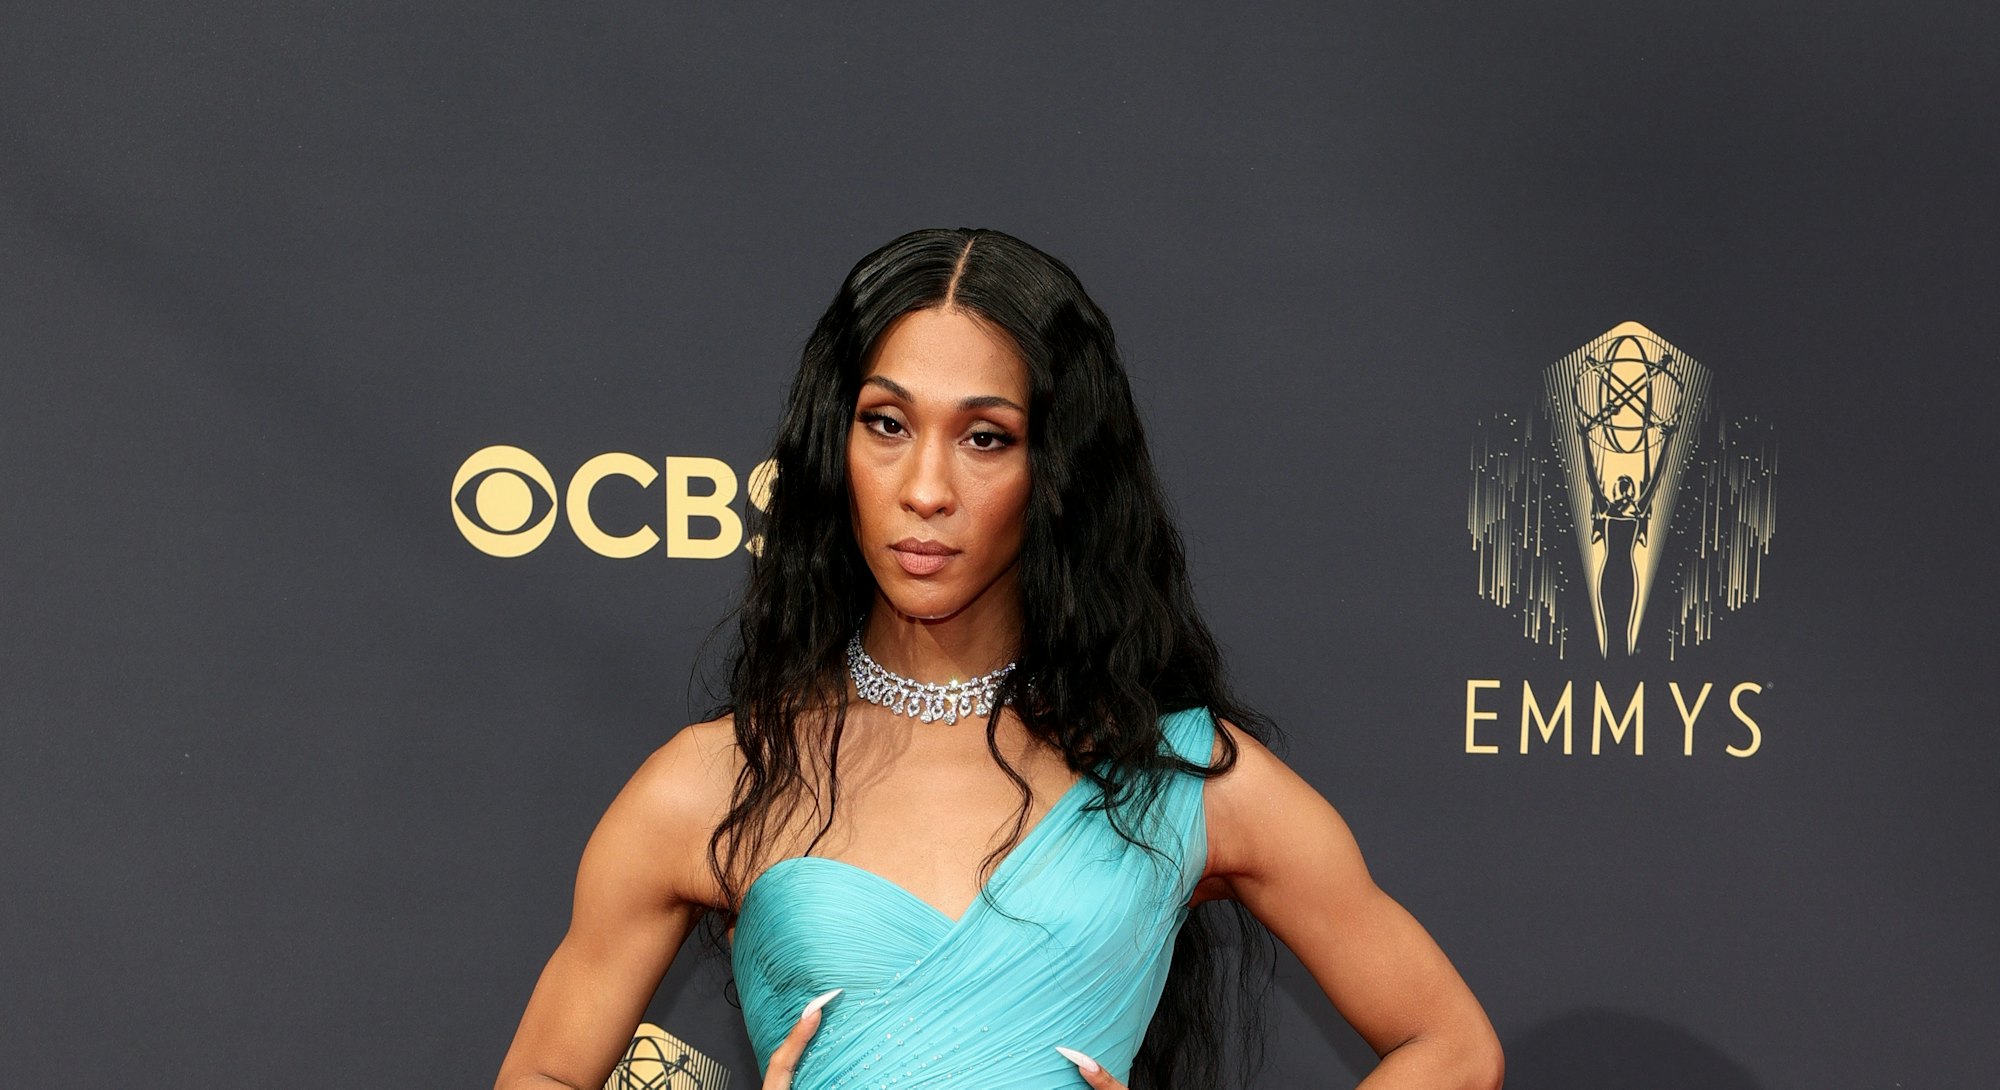 The 2021 Emmy Awards red carpet was full of looks with slits. Ahead, find the best leg-baring moment...